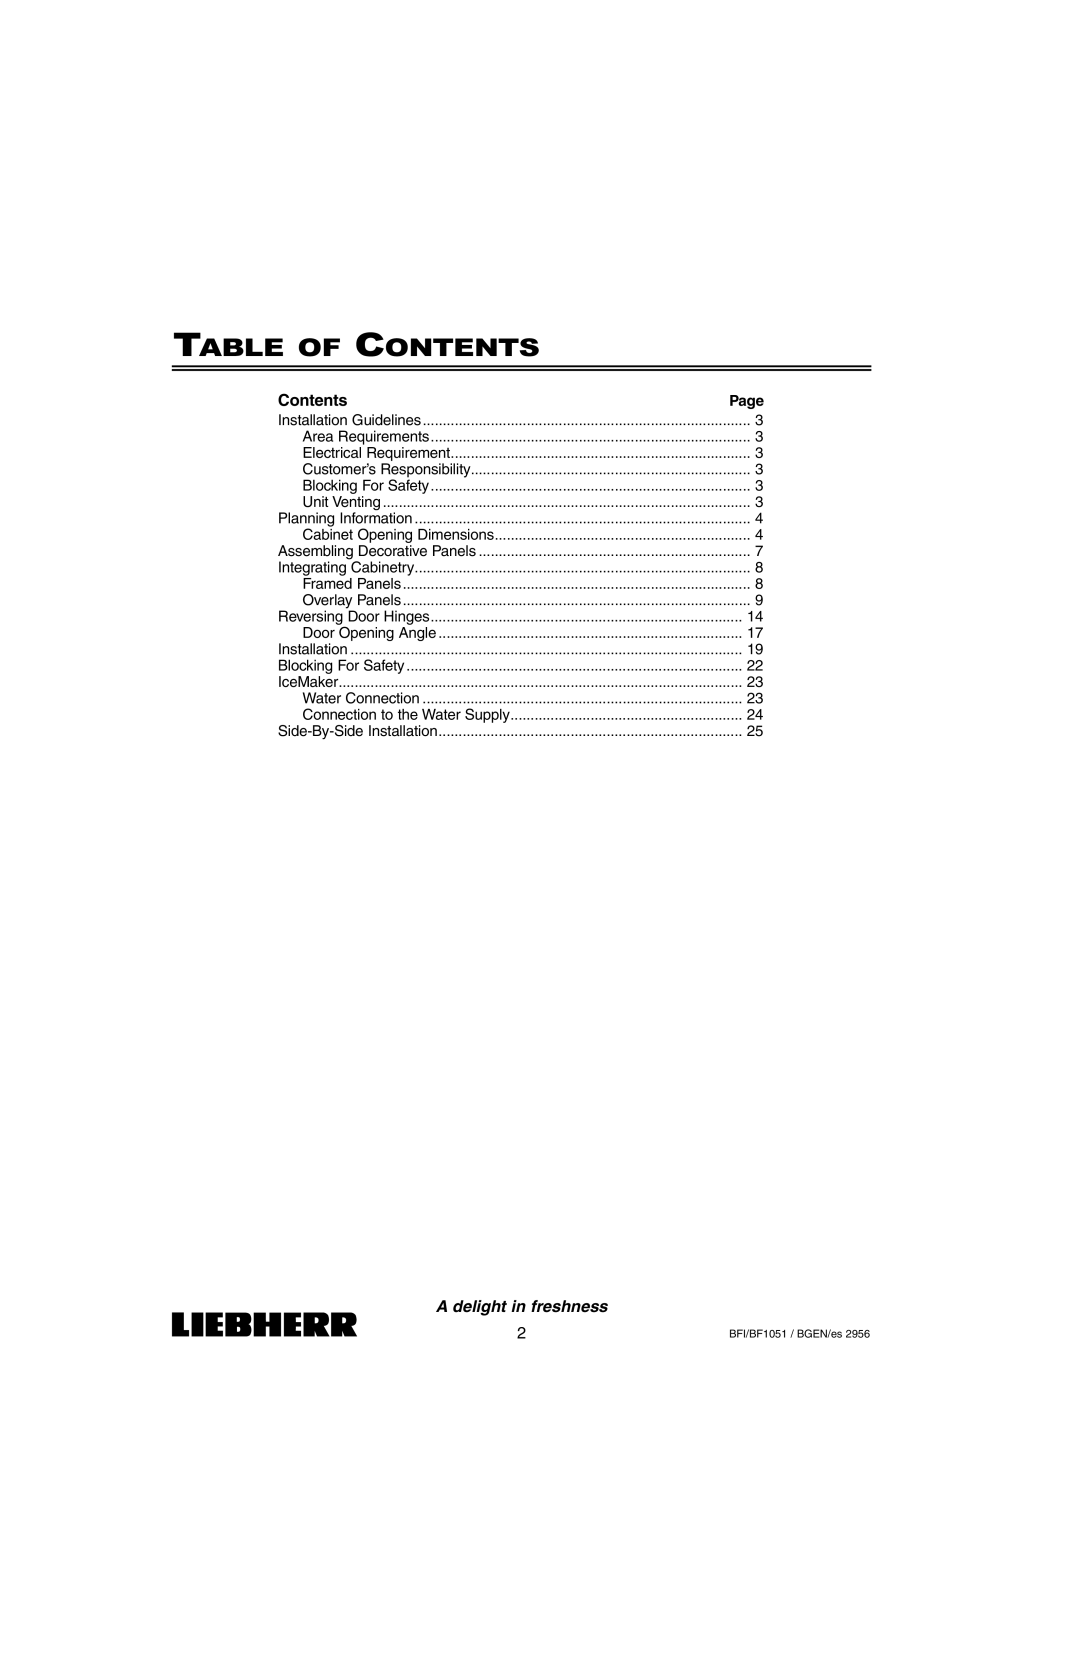 Liebherr BFI1051, BF1051 installation instructions Table Of Contents, A delight in freshness 